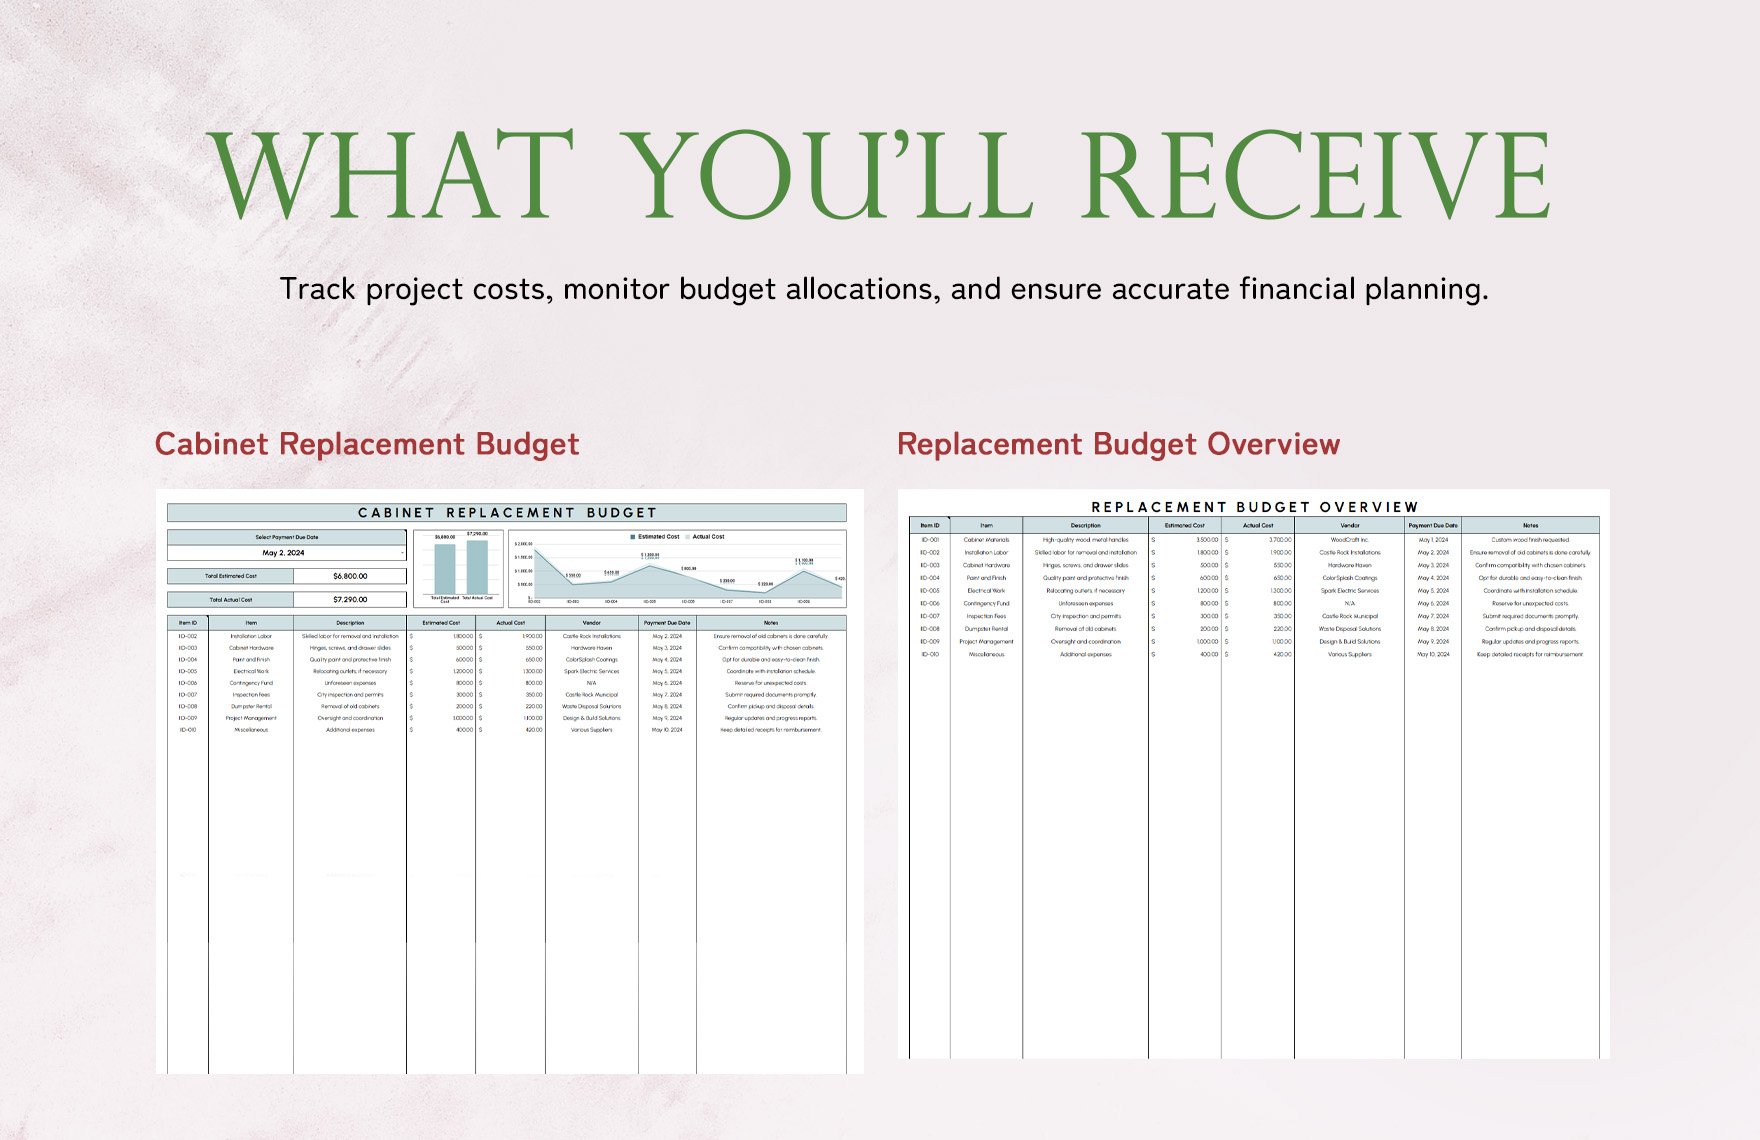 Cabinet Replacement Budget Template